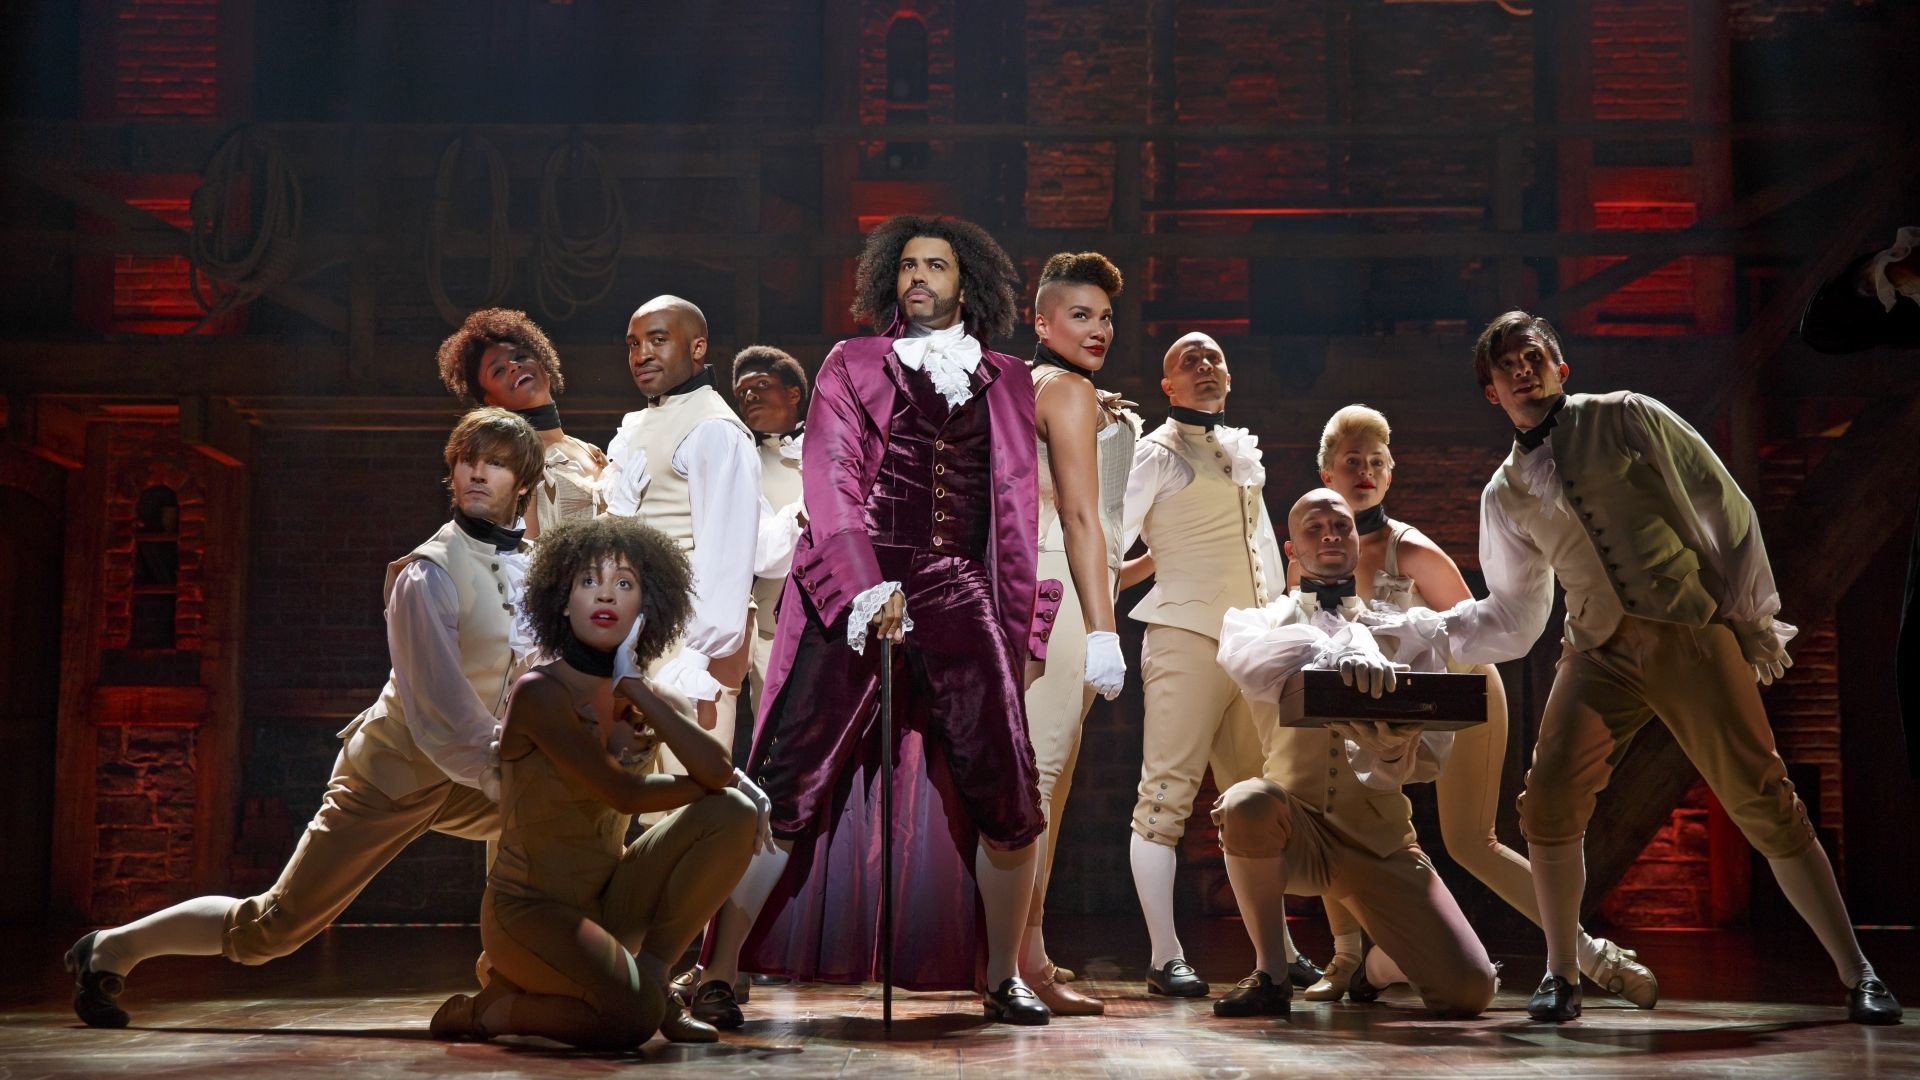 1920x1080 Photos] 9 Broadway Musicals That Will Give 'Hamilton' a Run for Its .